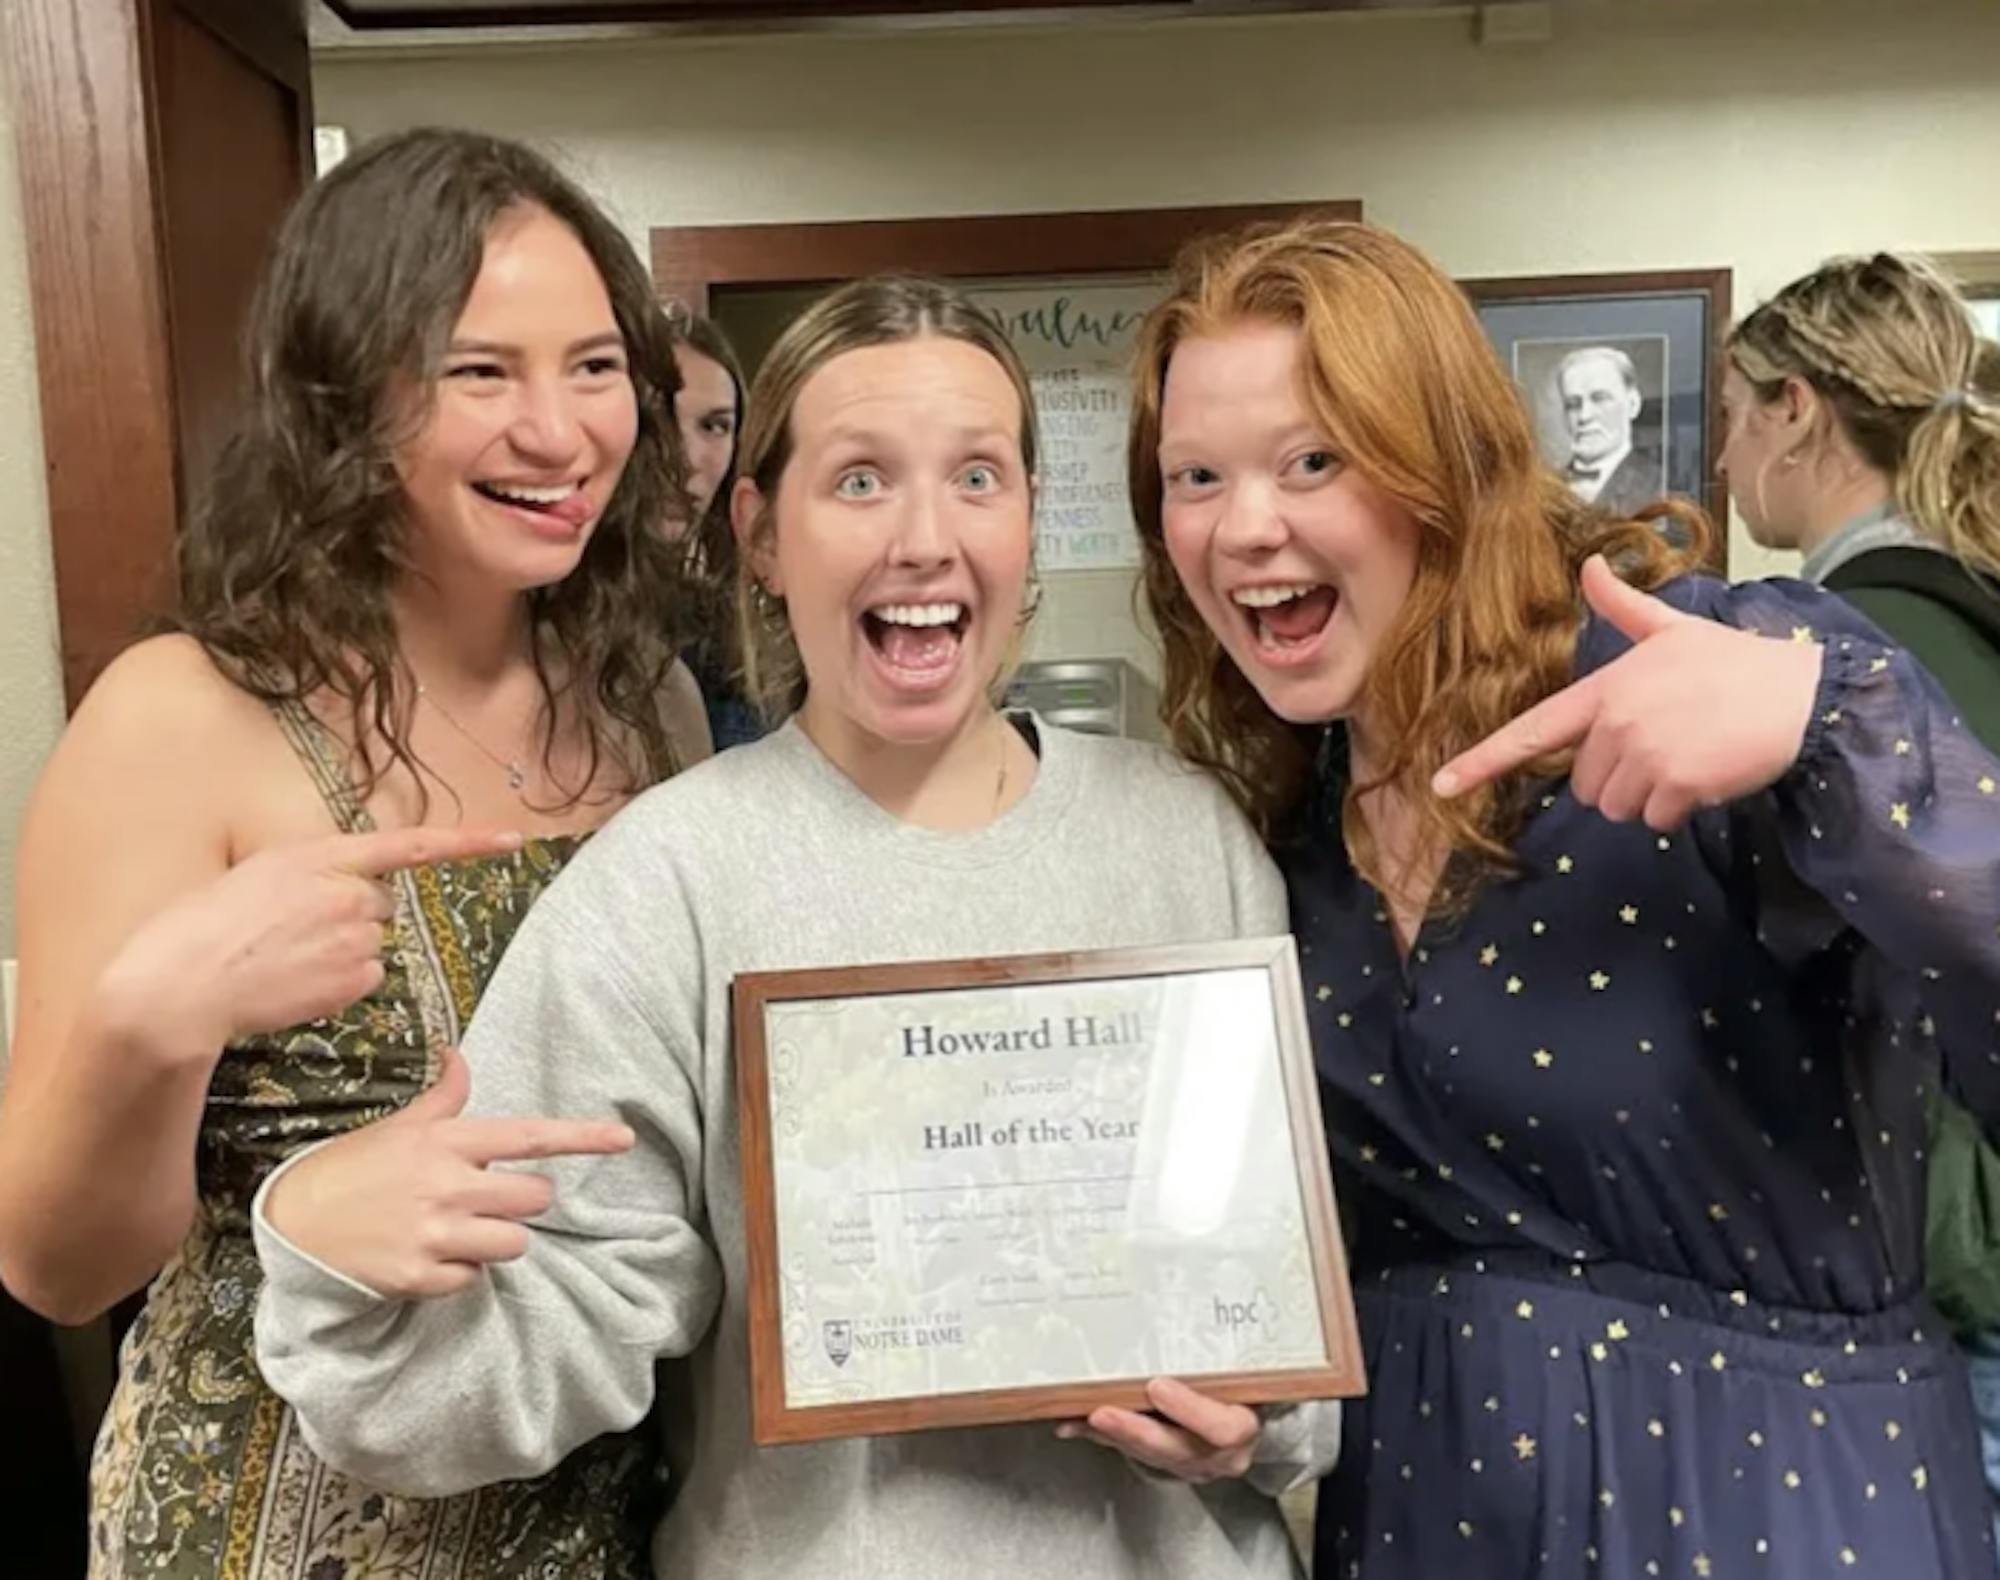 Howard Hall 2021-2022 vice presidents Cassie Van Etten (left) and Lauryn Pugh and president Clare Brown celebrate winning the 2021-2022 Hall of the Year contest.